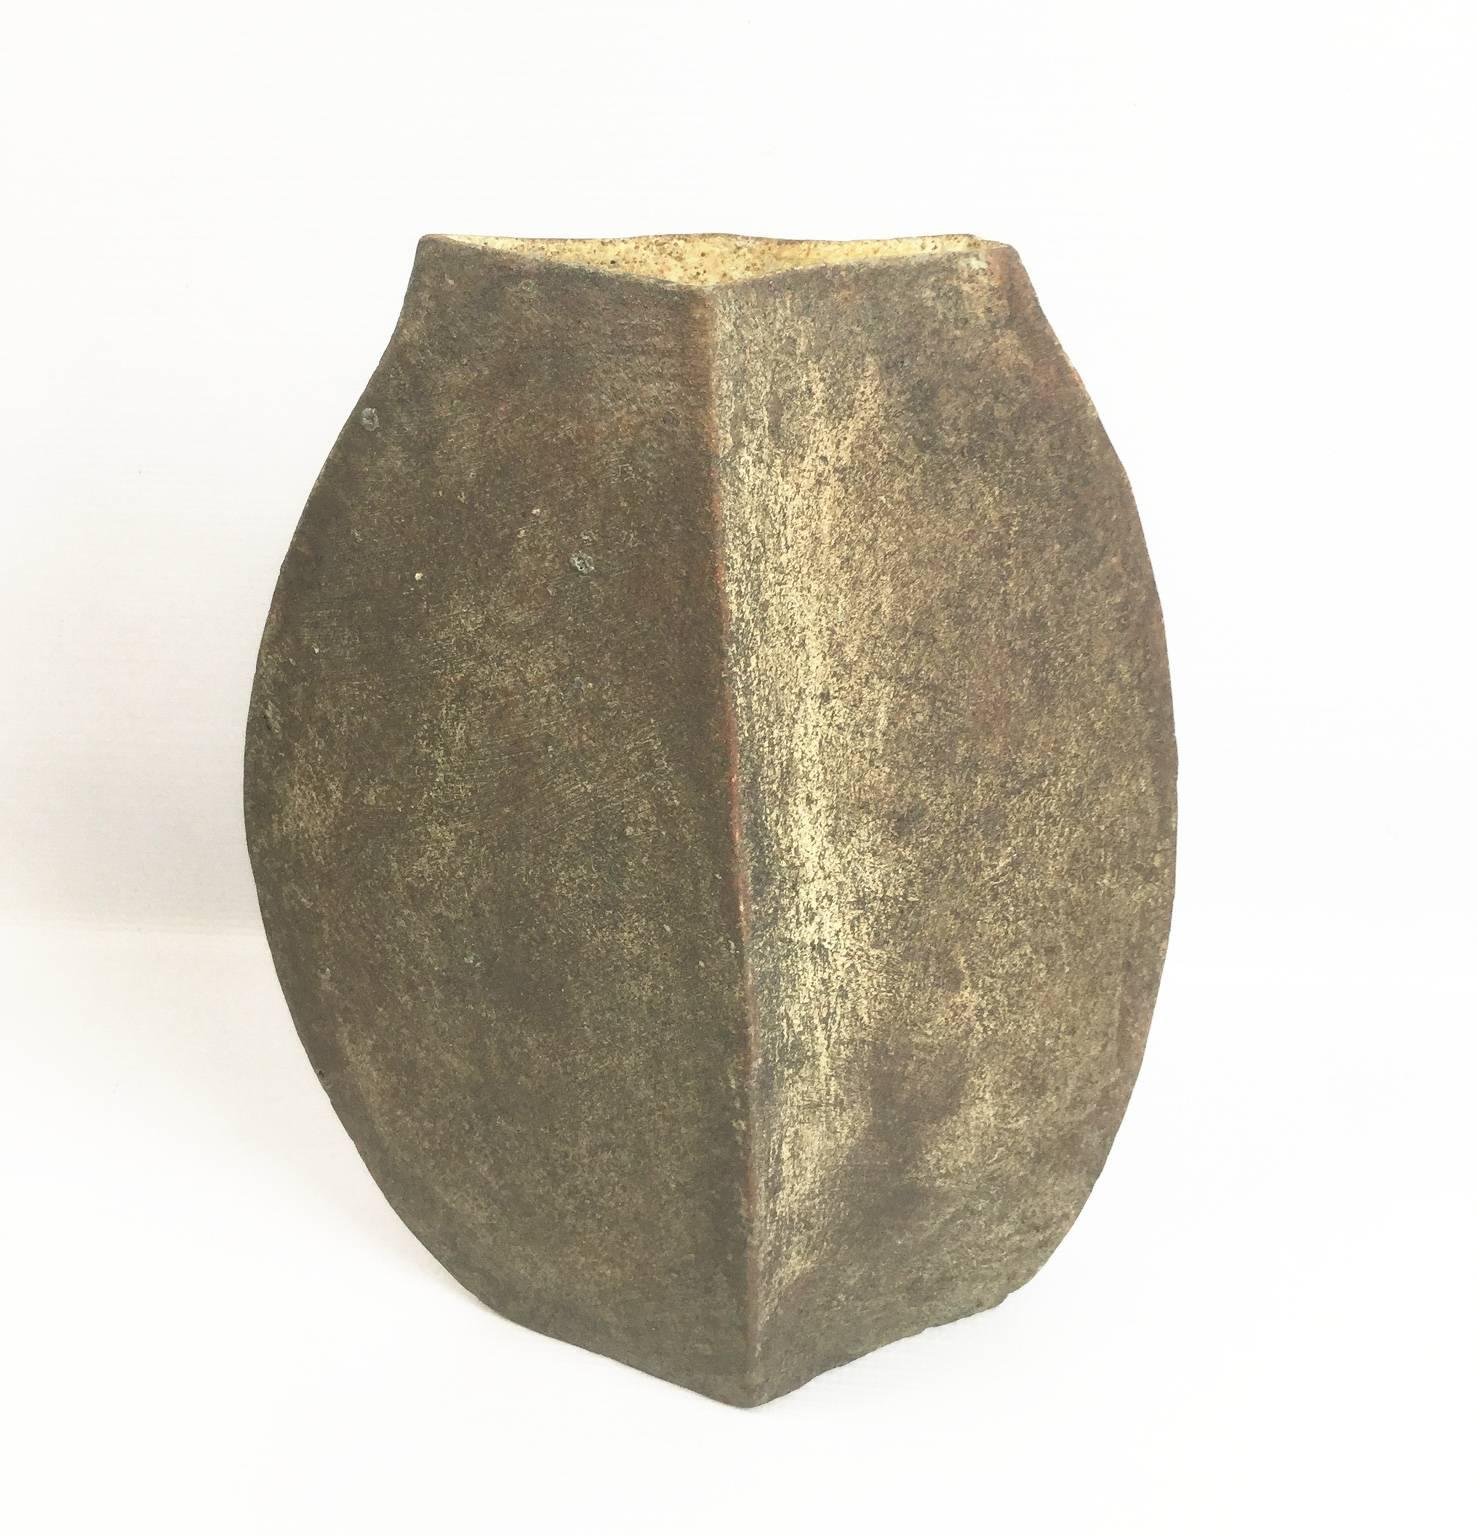 Welsh potter Paul Philp (1941) has made pottery for over 40 years, each piece is built by hand. Internationally known ceramic artist with exhibitions all around the world.
“The idea and philosophy behind my work is to produce objects that look as if